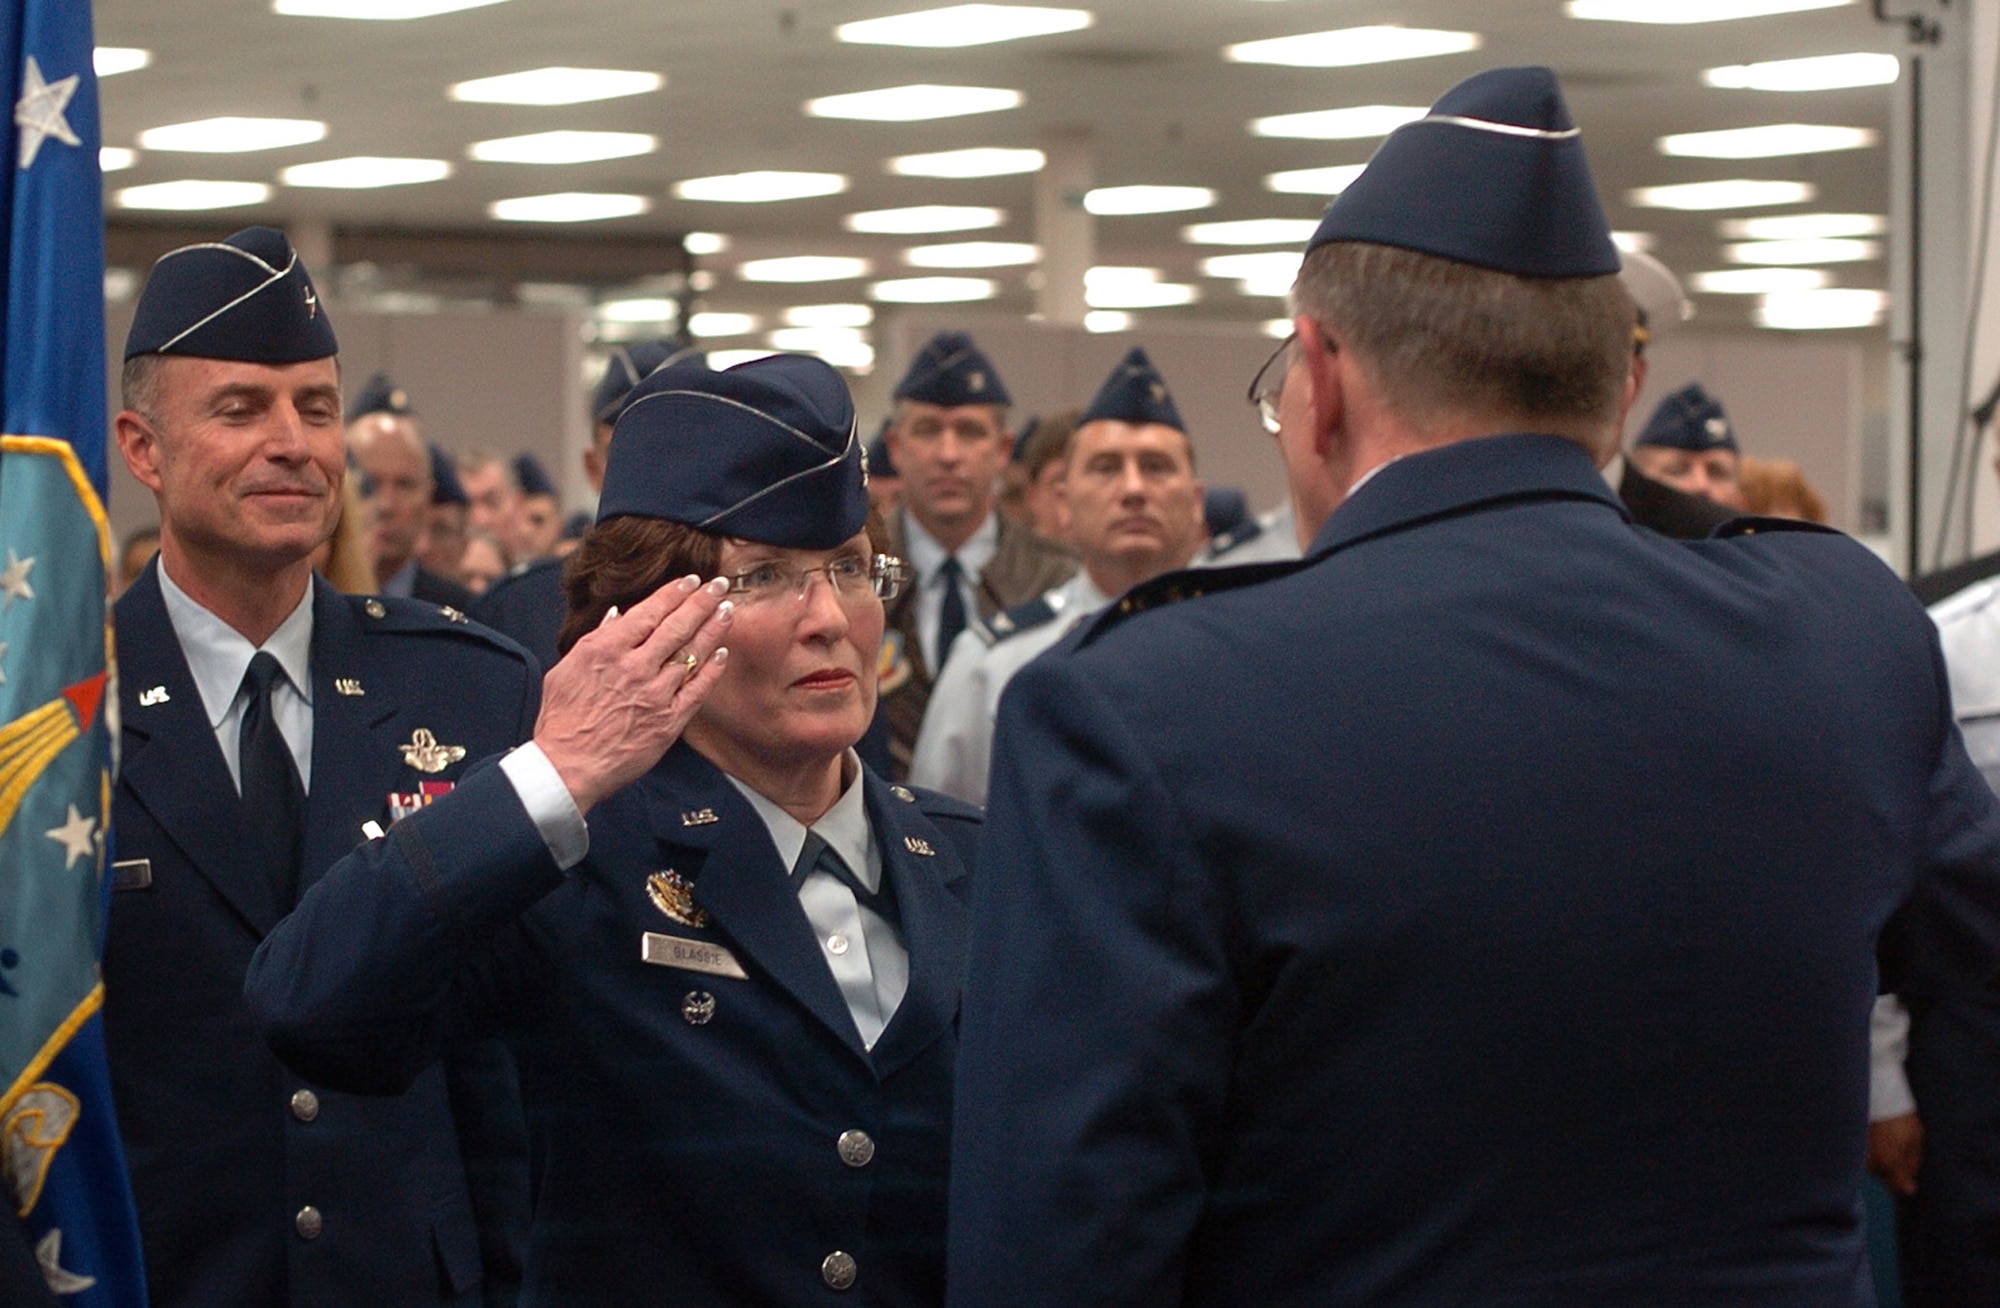 Col. Patricia S. Blassie salutes Lt. Gen. Charles E. Stenner, Jr., commander, Air Force Reserve Command, after accepting command of the Air Reserve Personnel Center in Denver, Nov. 29, 2010. Brig. Gen. Kevin E. Pottinger, (left) relinquished command of the center to serve as the mobilization assistant to the Assistant Secretary of the Air Force for Manpower and Reserve Affairs at the Pentagon. Colonel Blassie was the executive officer to the Chief of the Air Force Reserve at Robins Air Force Base, Ga., before assuming command of ARPC. (U.S. Air Force photo/Greg Simmonds)